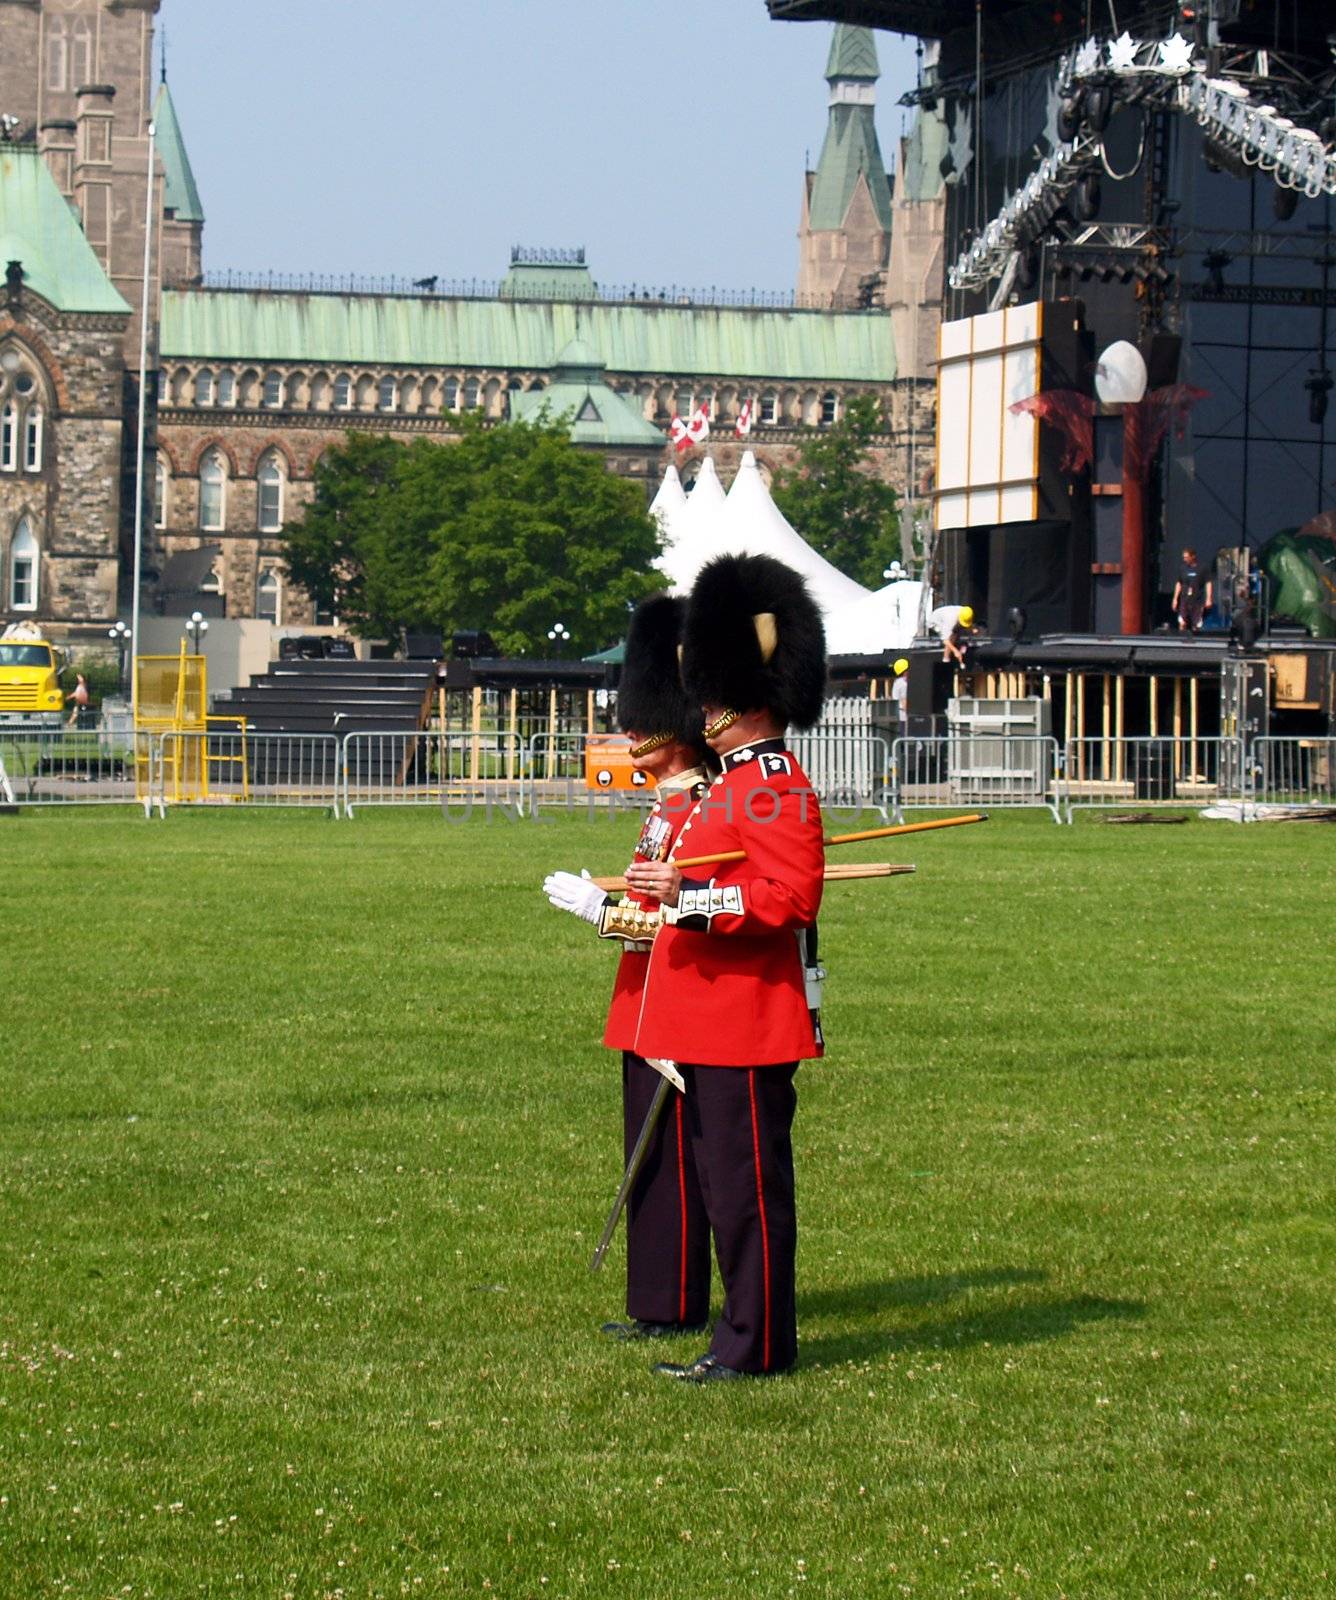 changing guard in front of the Canadian parliament in Ottawa